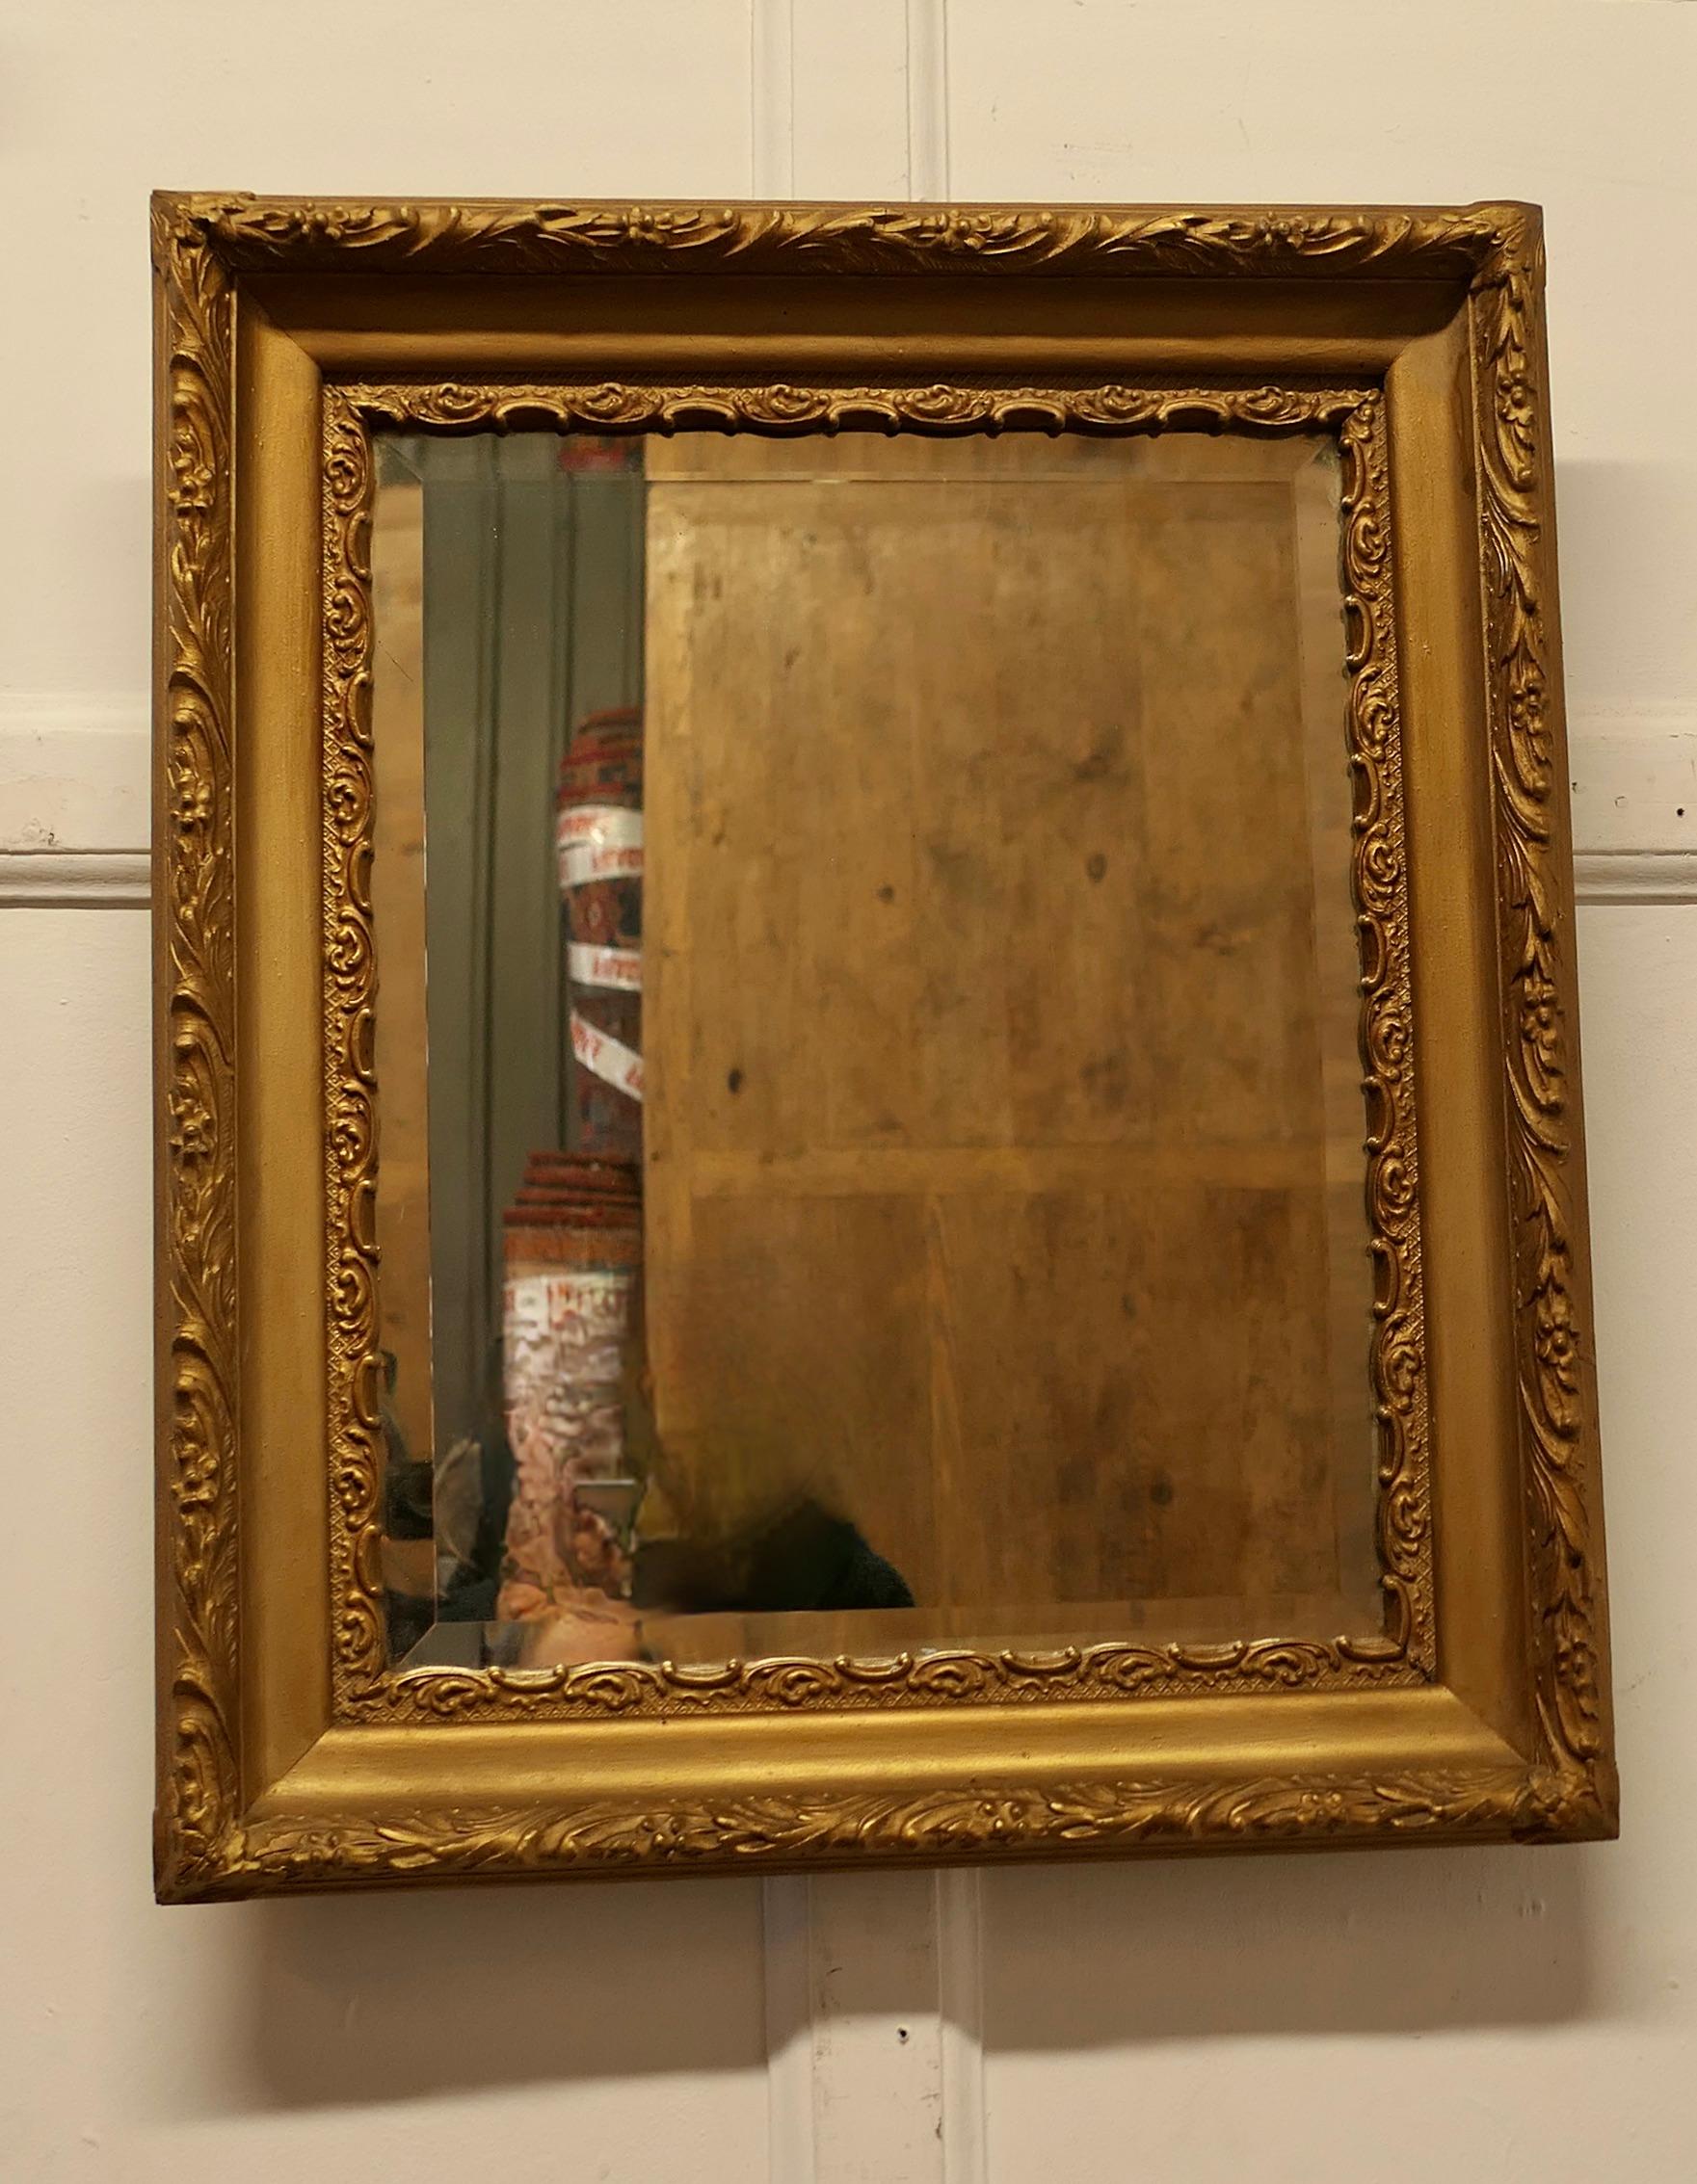 Fine Quality Rectangular Gilt Wall Mirror

The mirror is in a 3.5” wide beautifully decorated Gilt Frame, it is a good size and has a wide bevelled glass
Both the glass and the frame are in good antique condition  
The overall size  is 26” high x